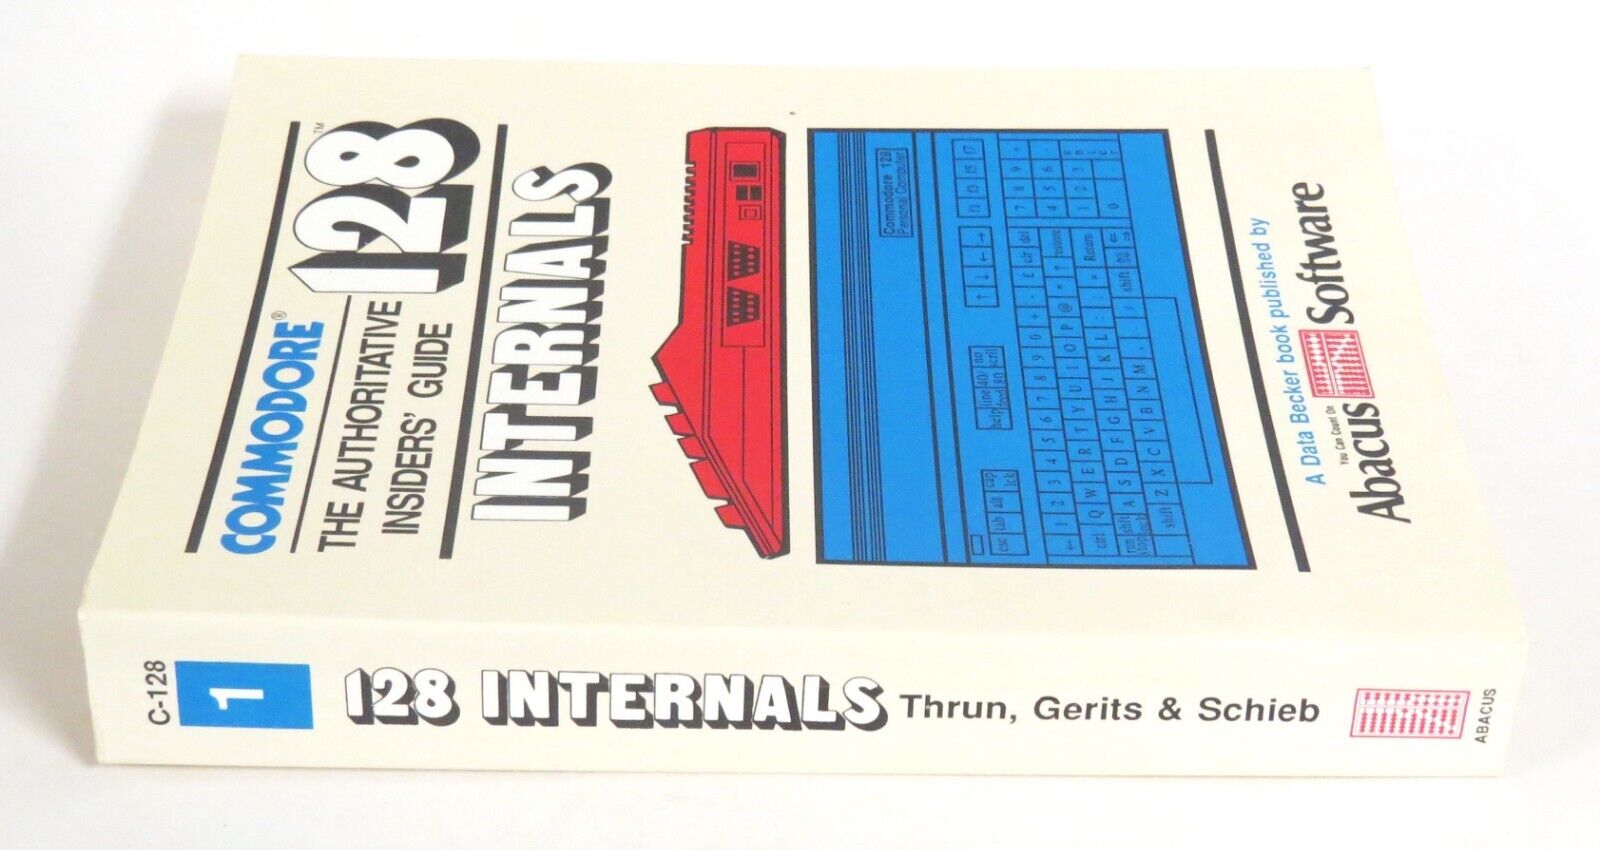 Vintage Commodore 128 Internals Reference Book 1